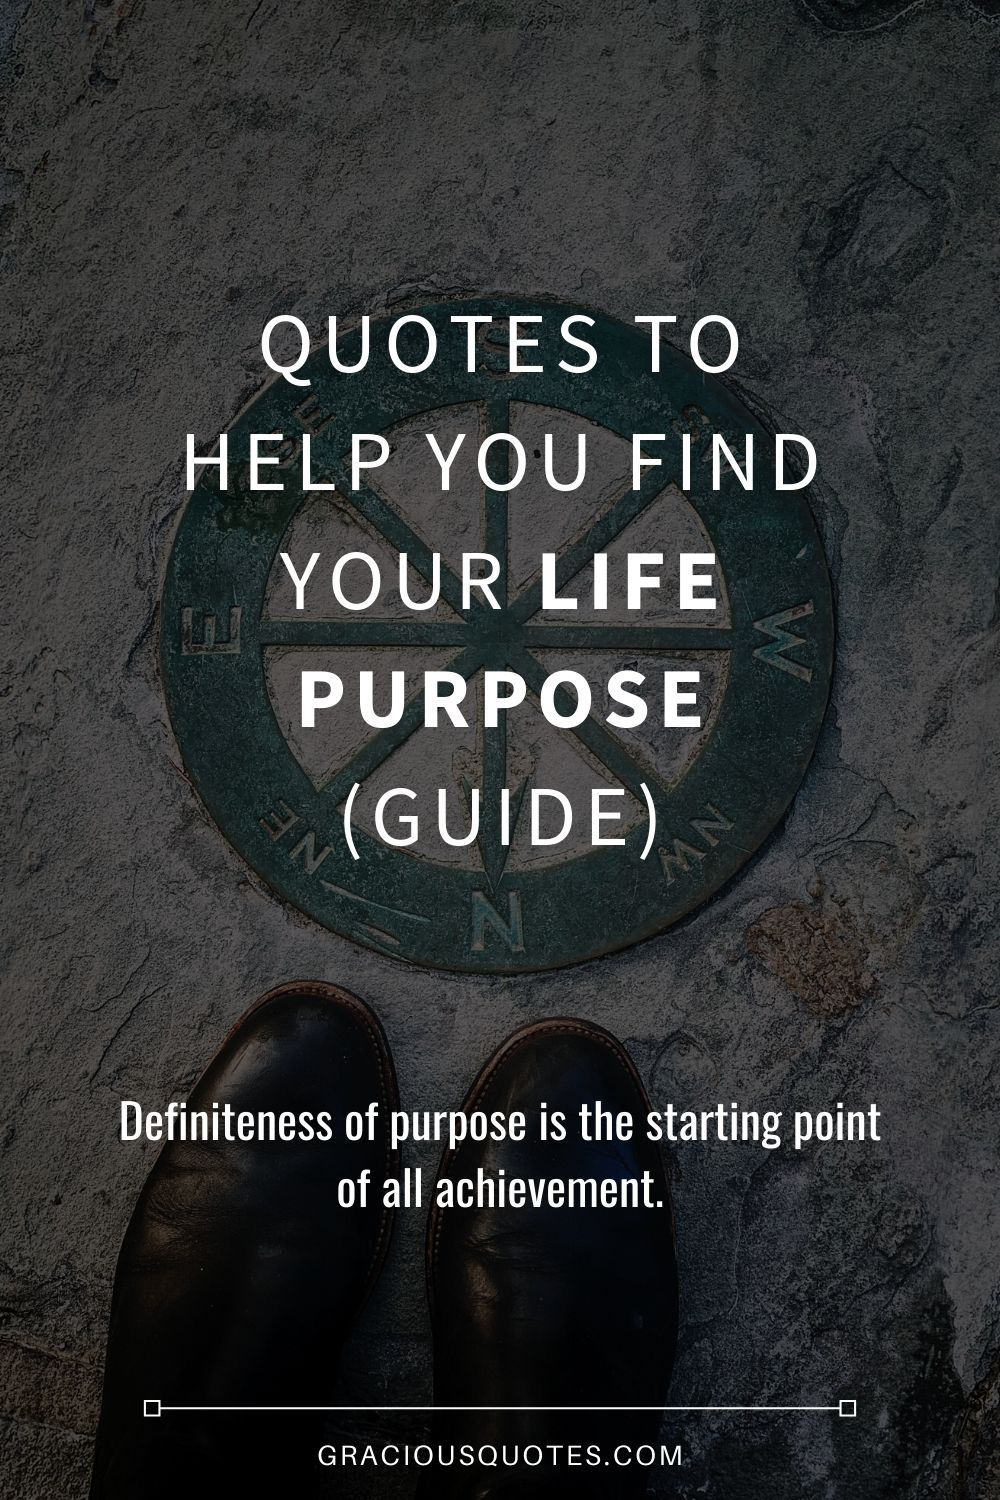 Quotes to Help You Find Your Life Purpose (GUIDE) - Gracious Quotes